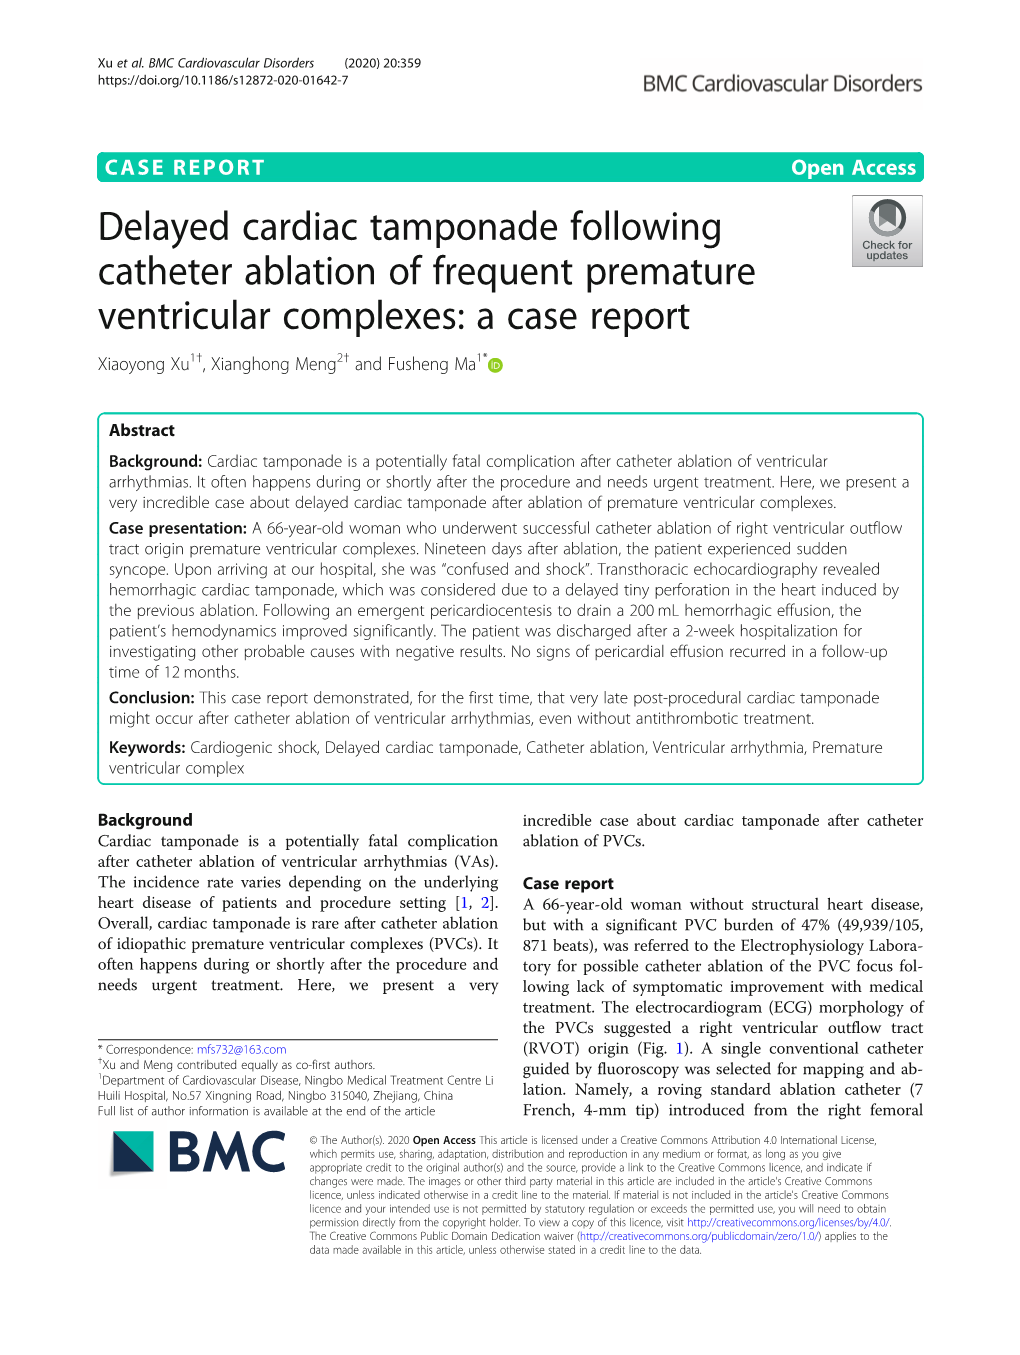 Delayed Cardiac Tamponade Following Catheter Ablation of Frequent Premature Ventricular Complexes: a Case Report Xiaoyong Xu1†, Xianghong Meng2† and Fusheng Ma1*